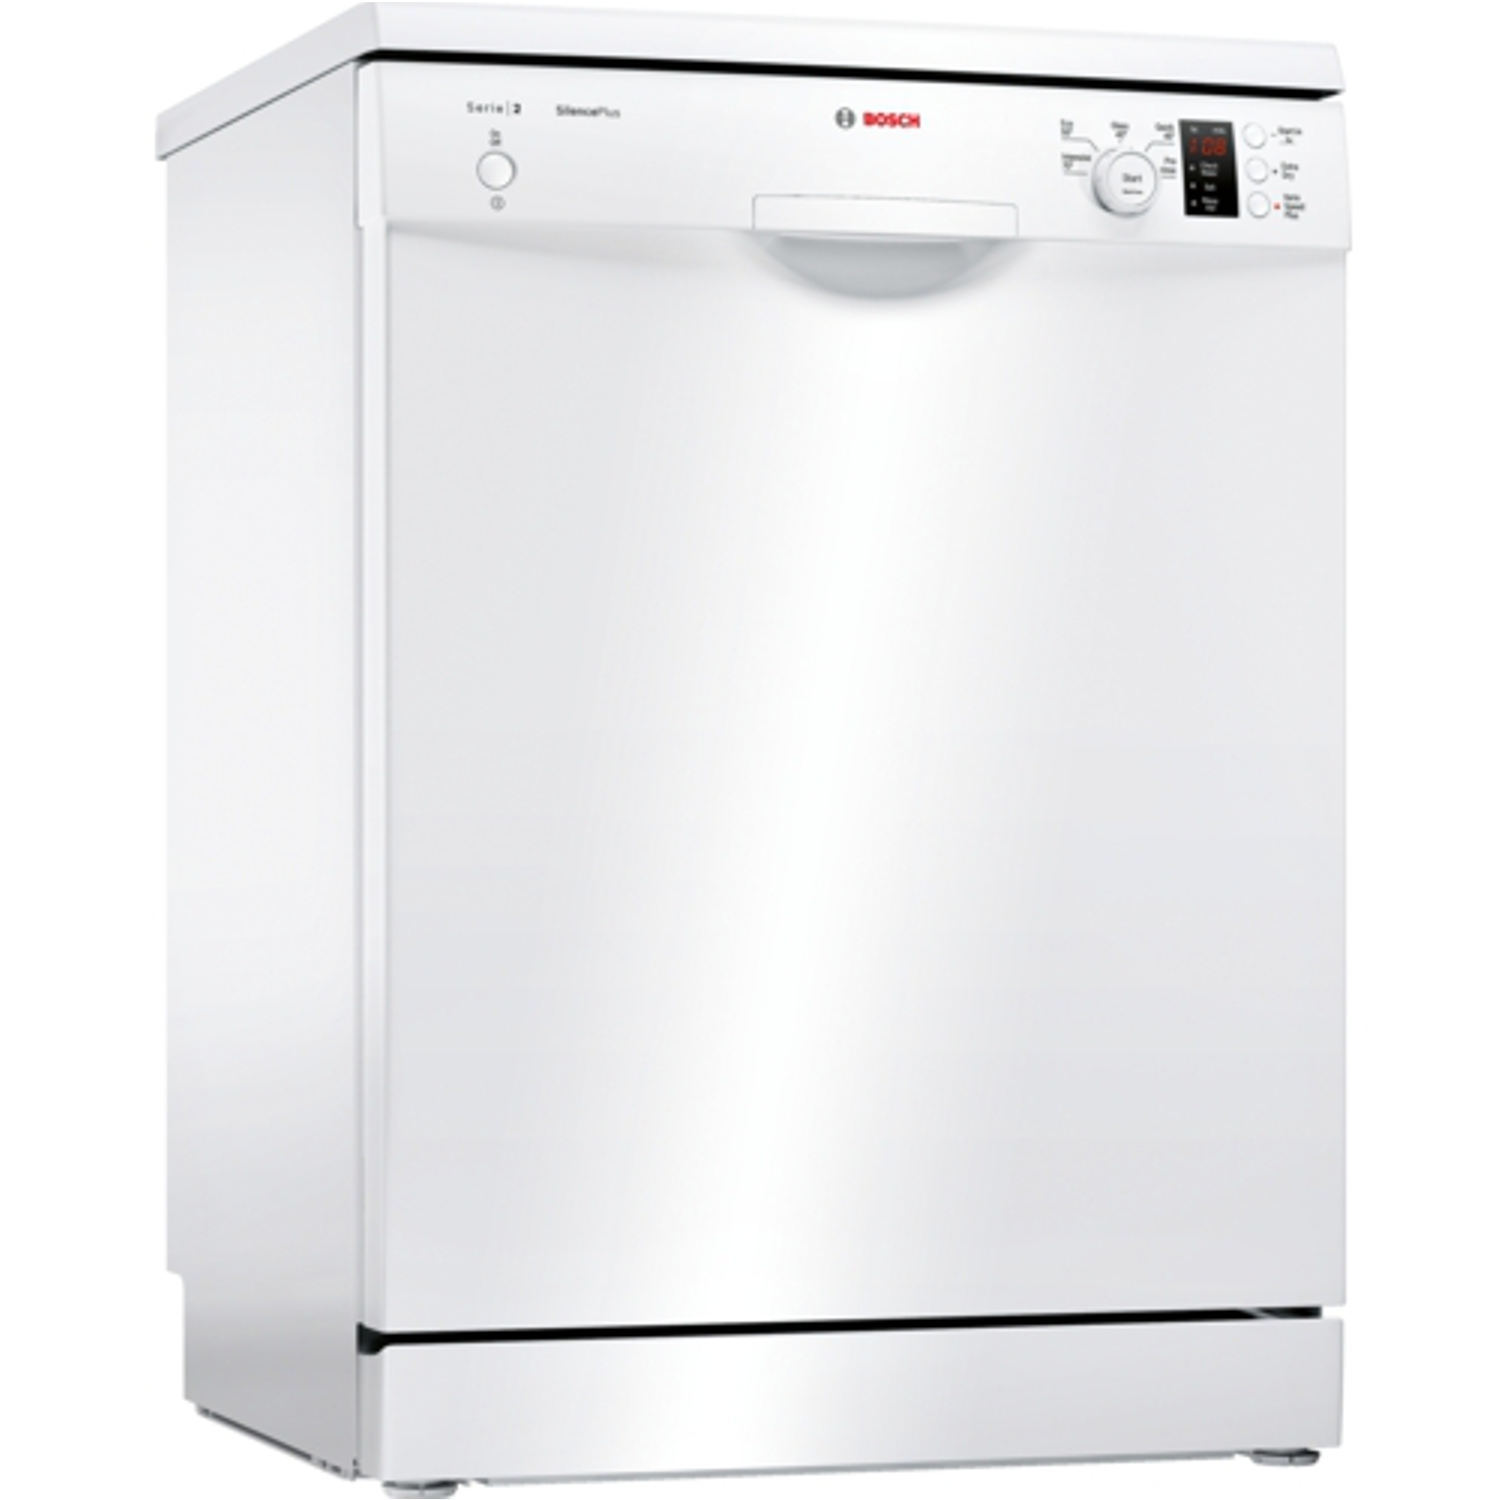 Bosch Full Size Dishwasher - White - A++ Rated - 0